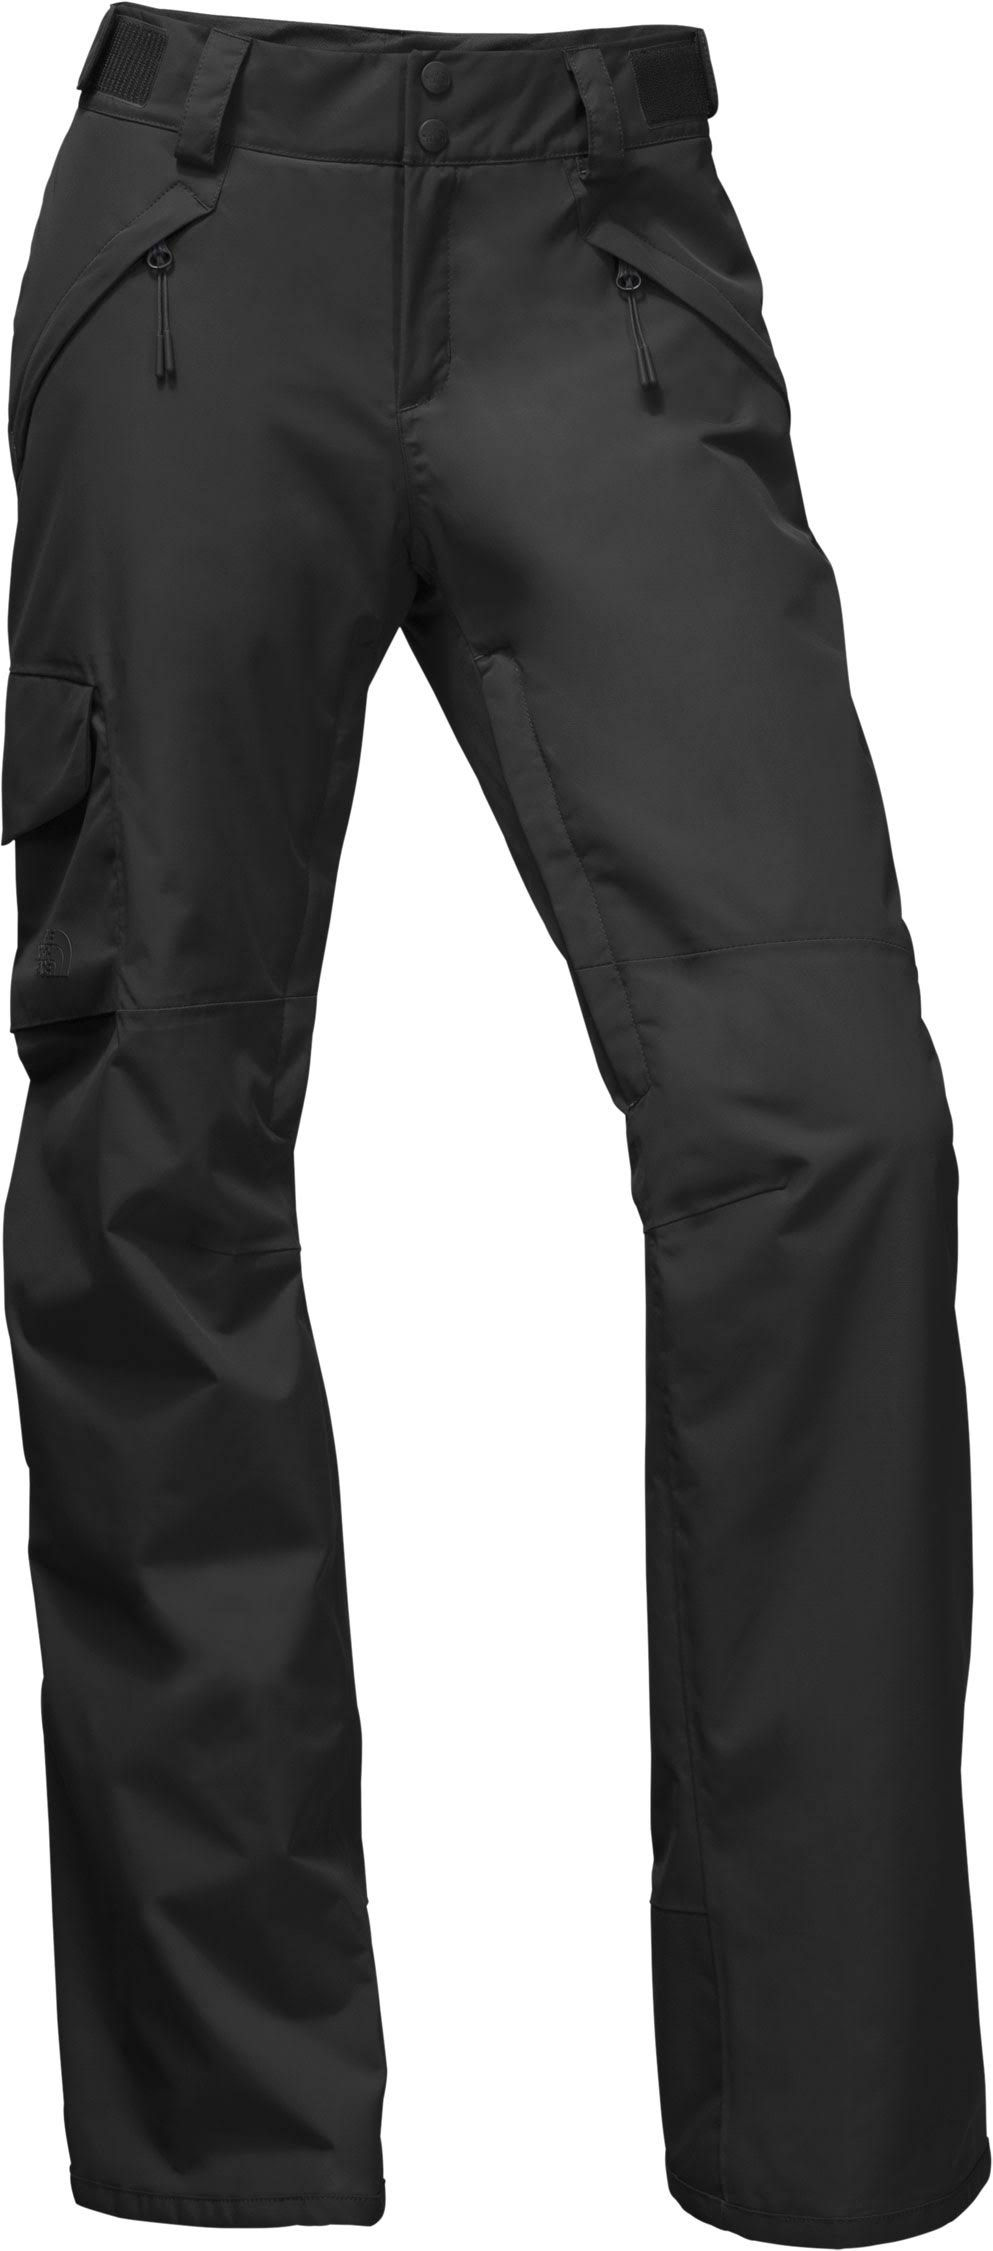 The North Face Freedom Insulated Pant Women's- Black